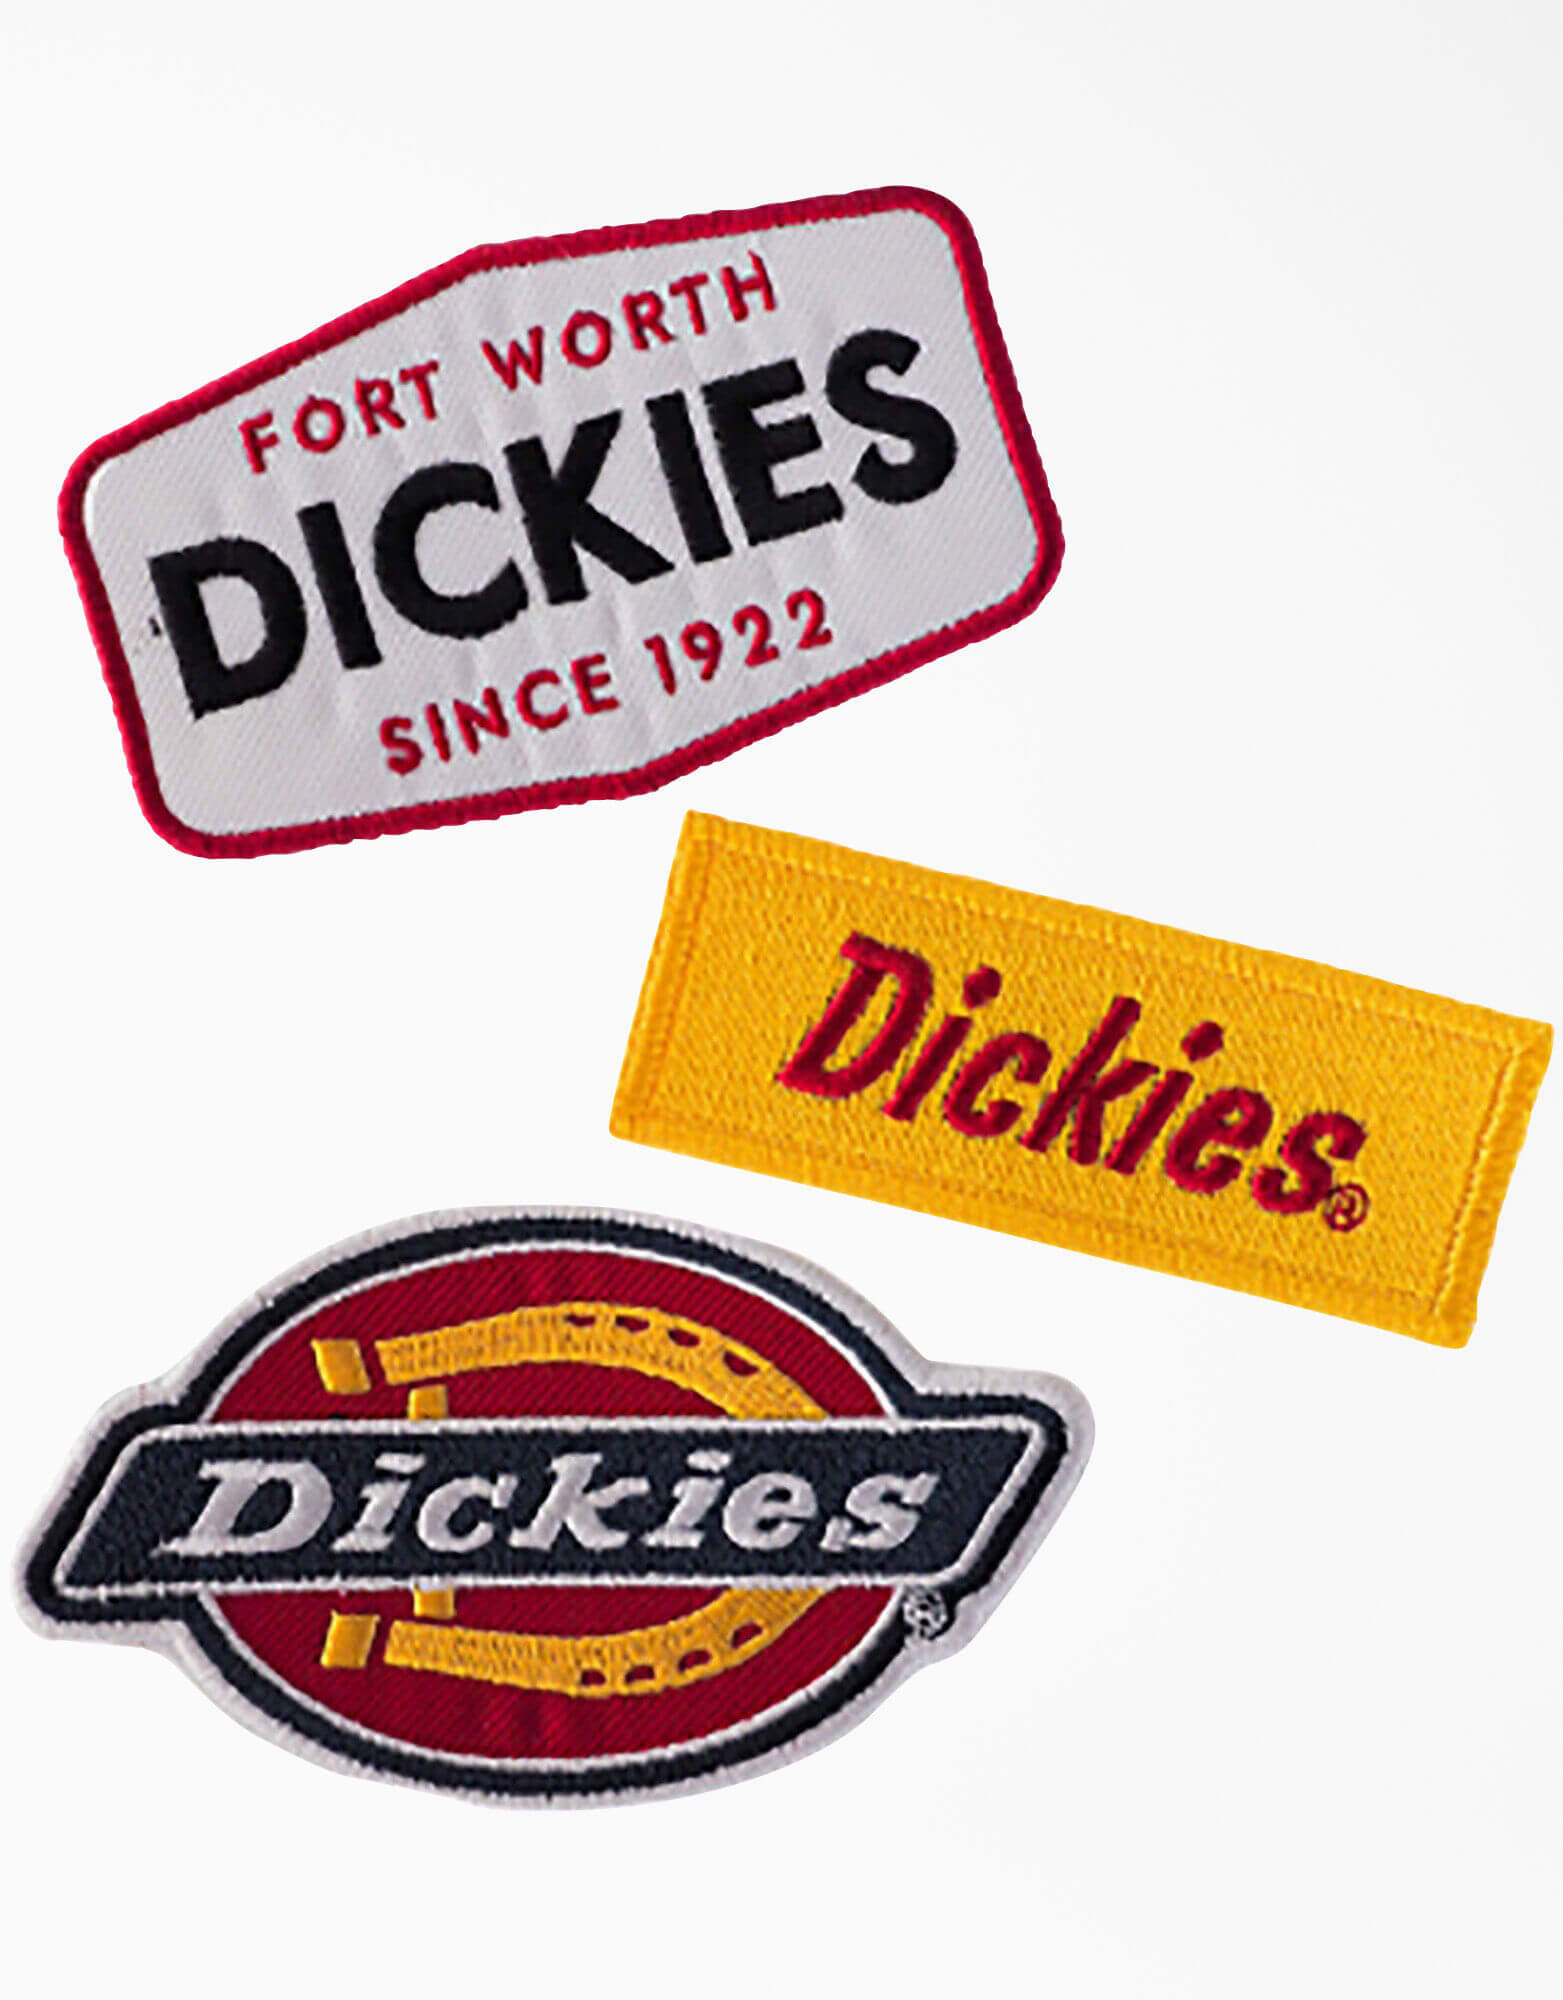 SDickies Logo Iron-on Patches, 3-Pack, Assorted Colors